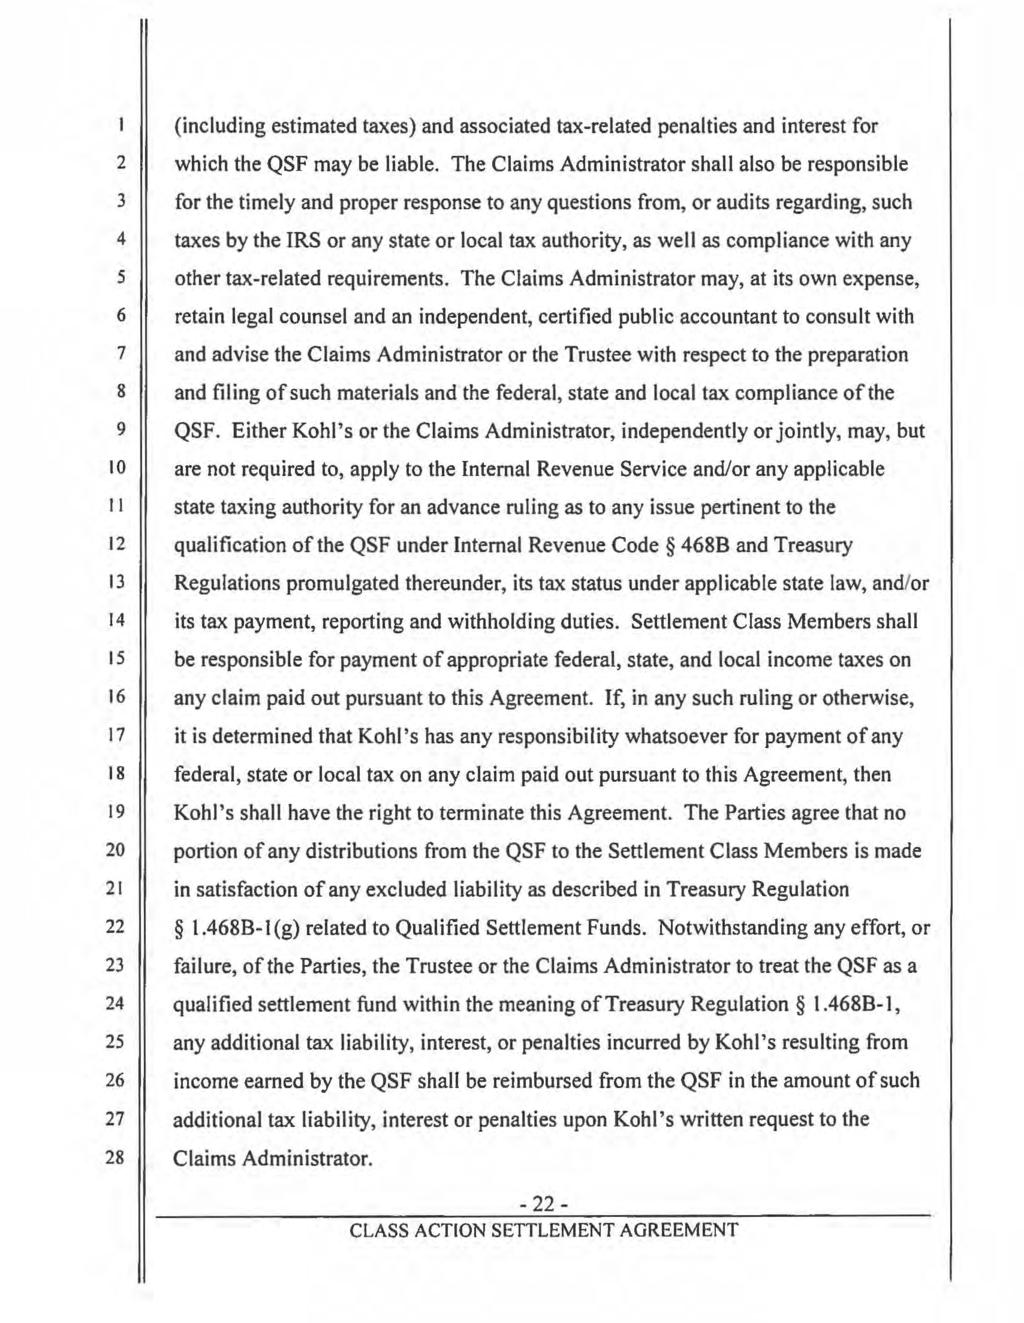 Case 5:15-cv-01143-RGK-SP Document 63-3 Filed 03/14/16 Page 24 of 59 Page ID #:793 (including estimated taxes) and associated tax-related penalties and interest for 2 which the QSF may be liable.